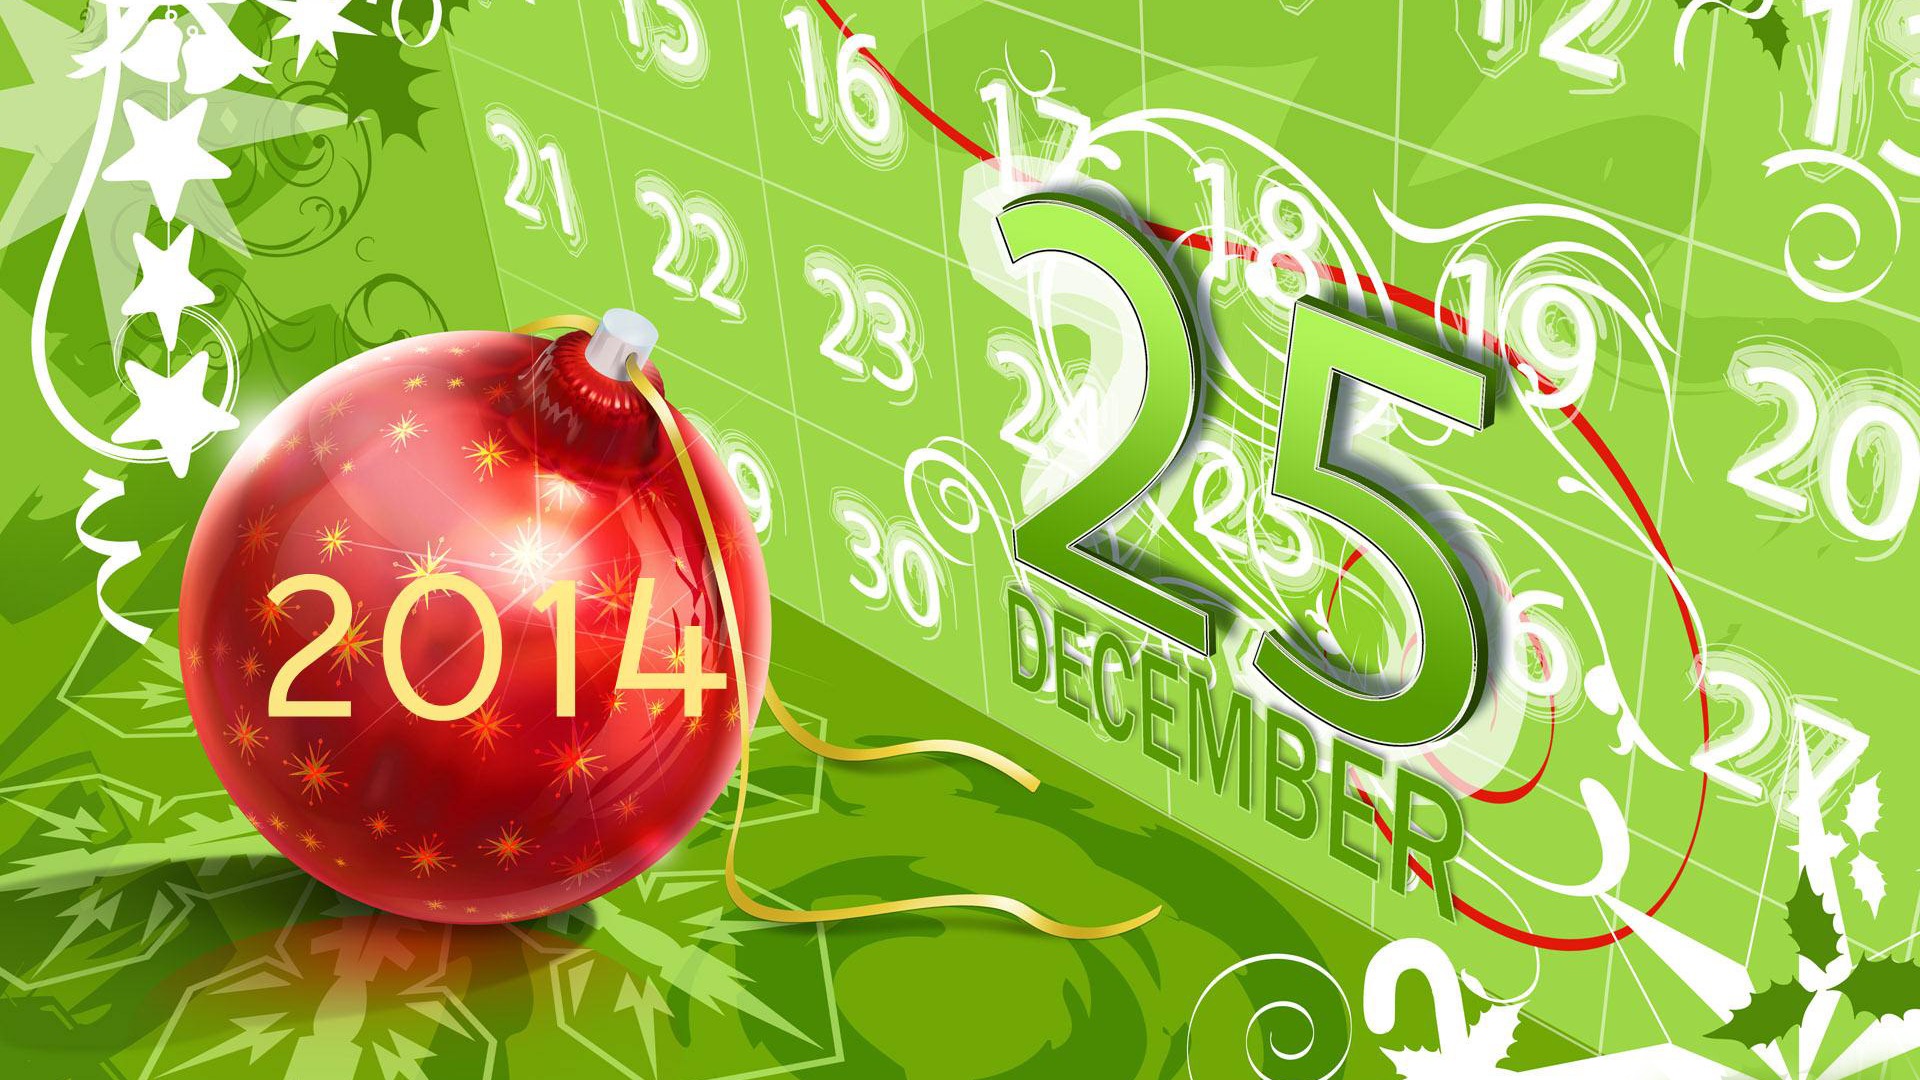 2014 New Year Theme HD Wallpapers (1) #6 - 1920x1080